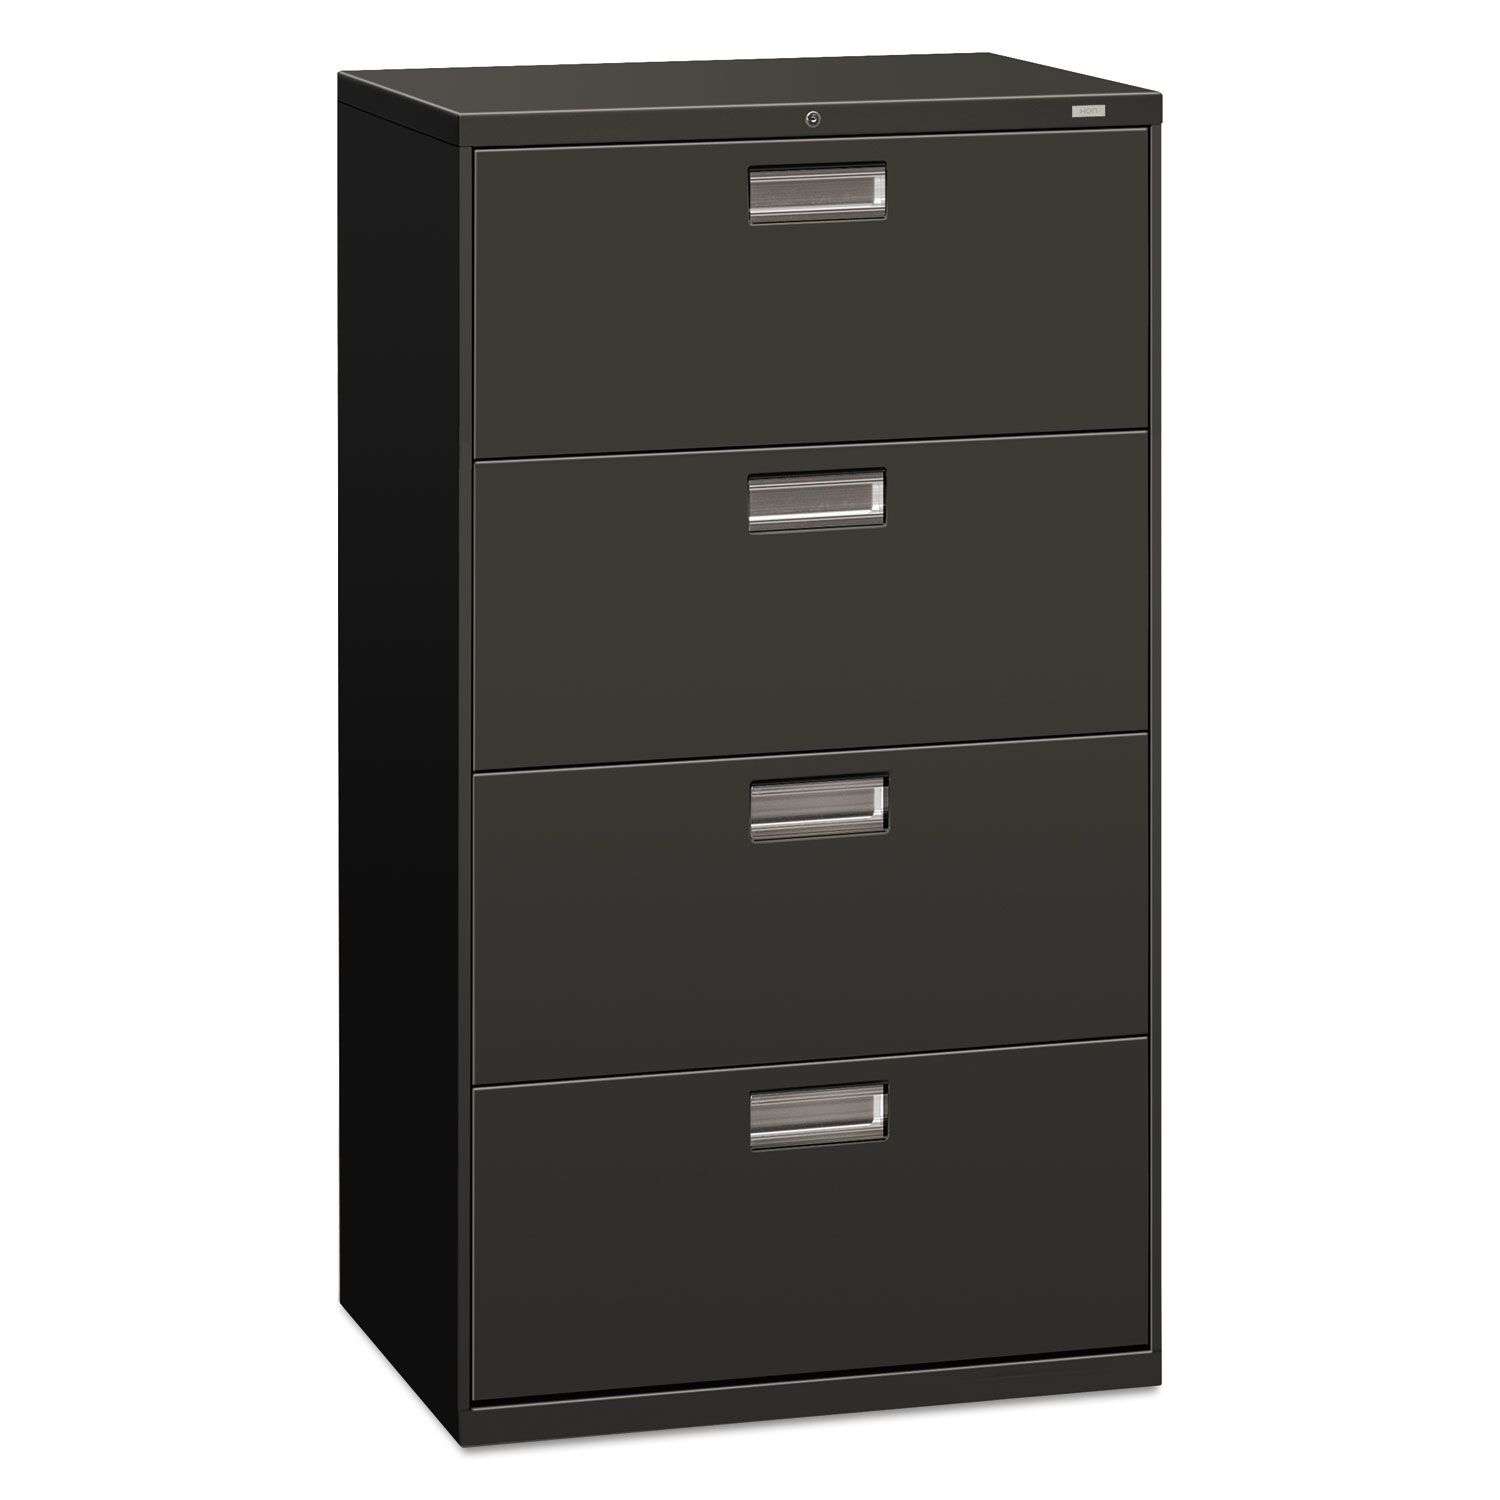  HON H674.L.S 600 Series Four-Drawer Lateral File, 30w x 18d x 52.5h, Charcoal (HON674LS) 